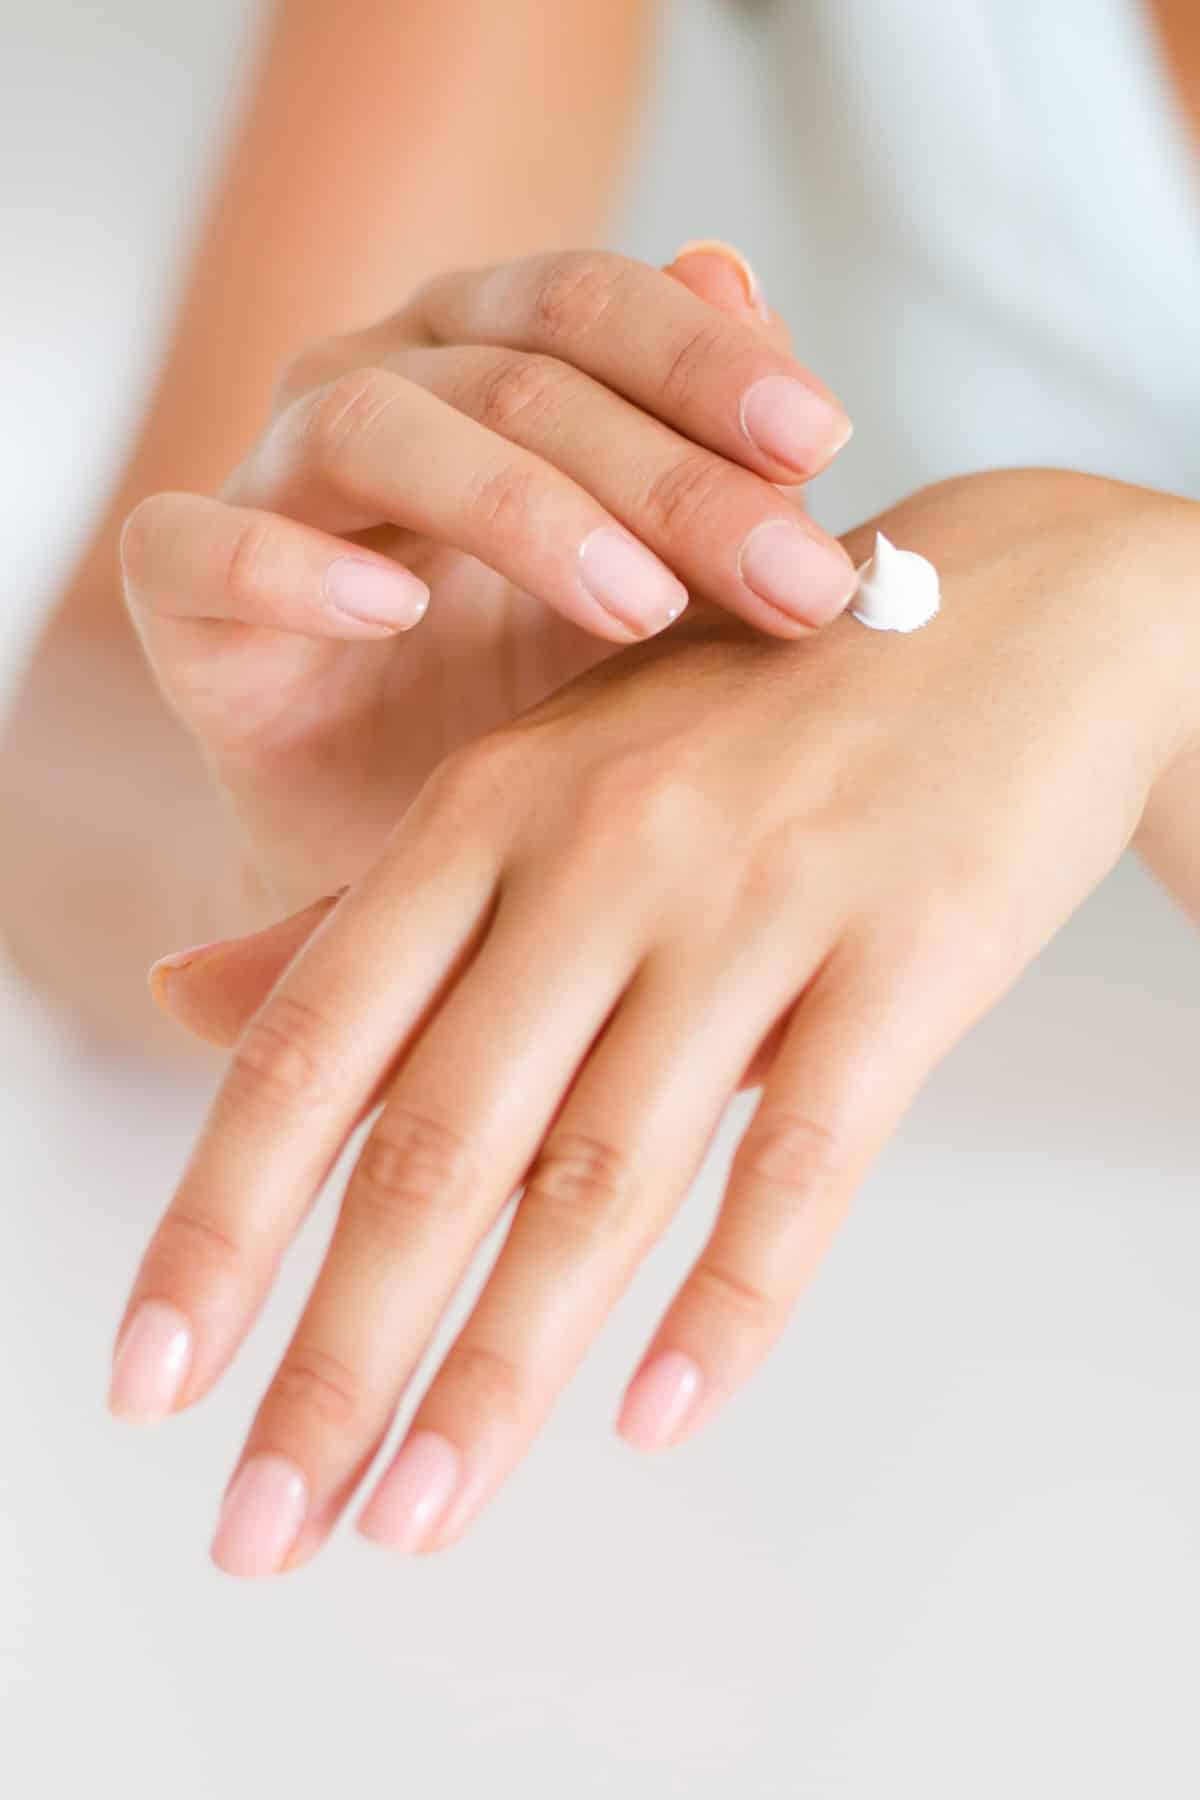 woman's hands applying lotion.